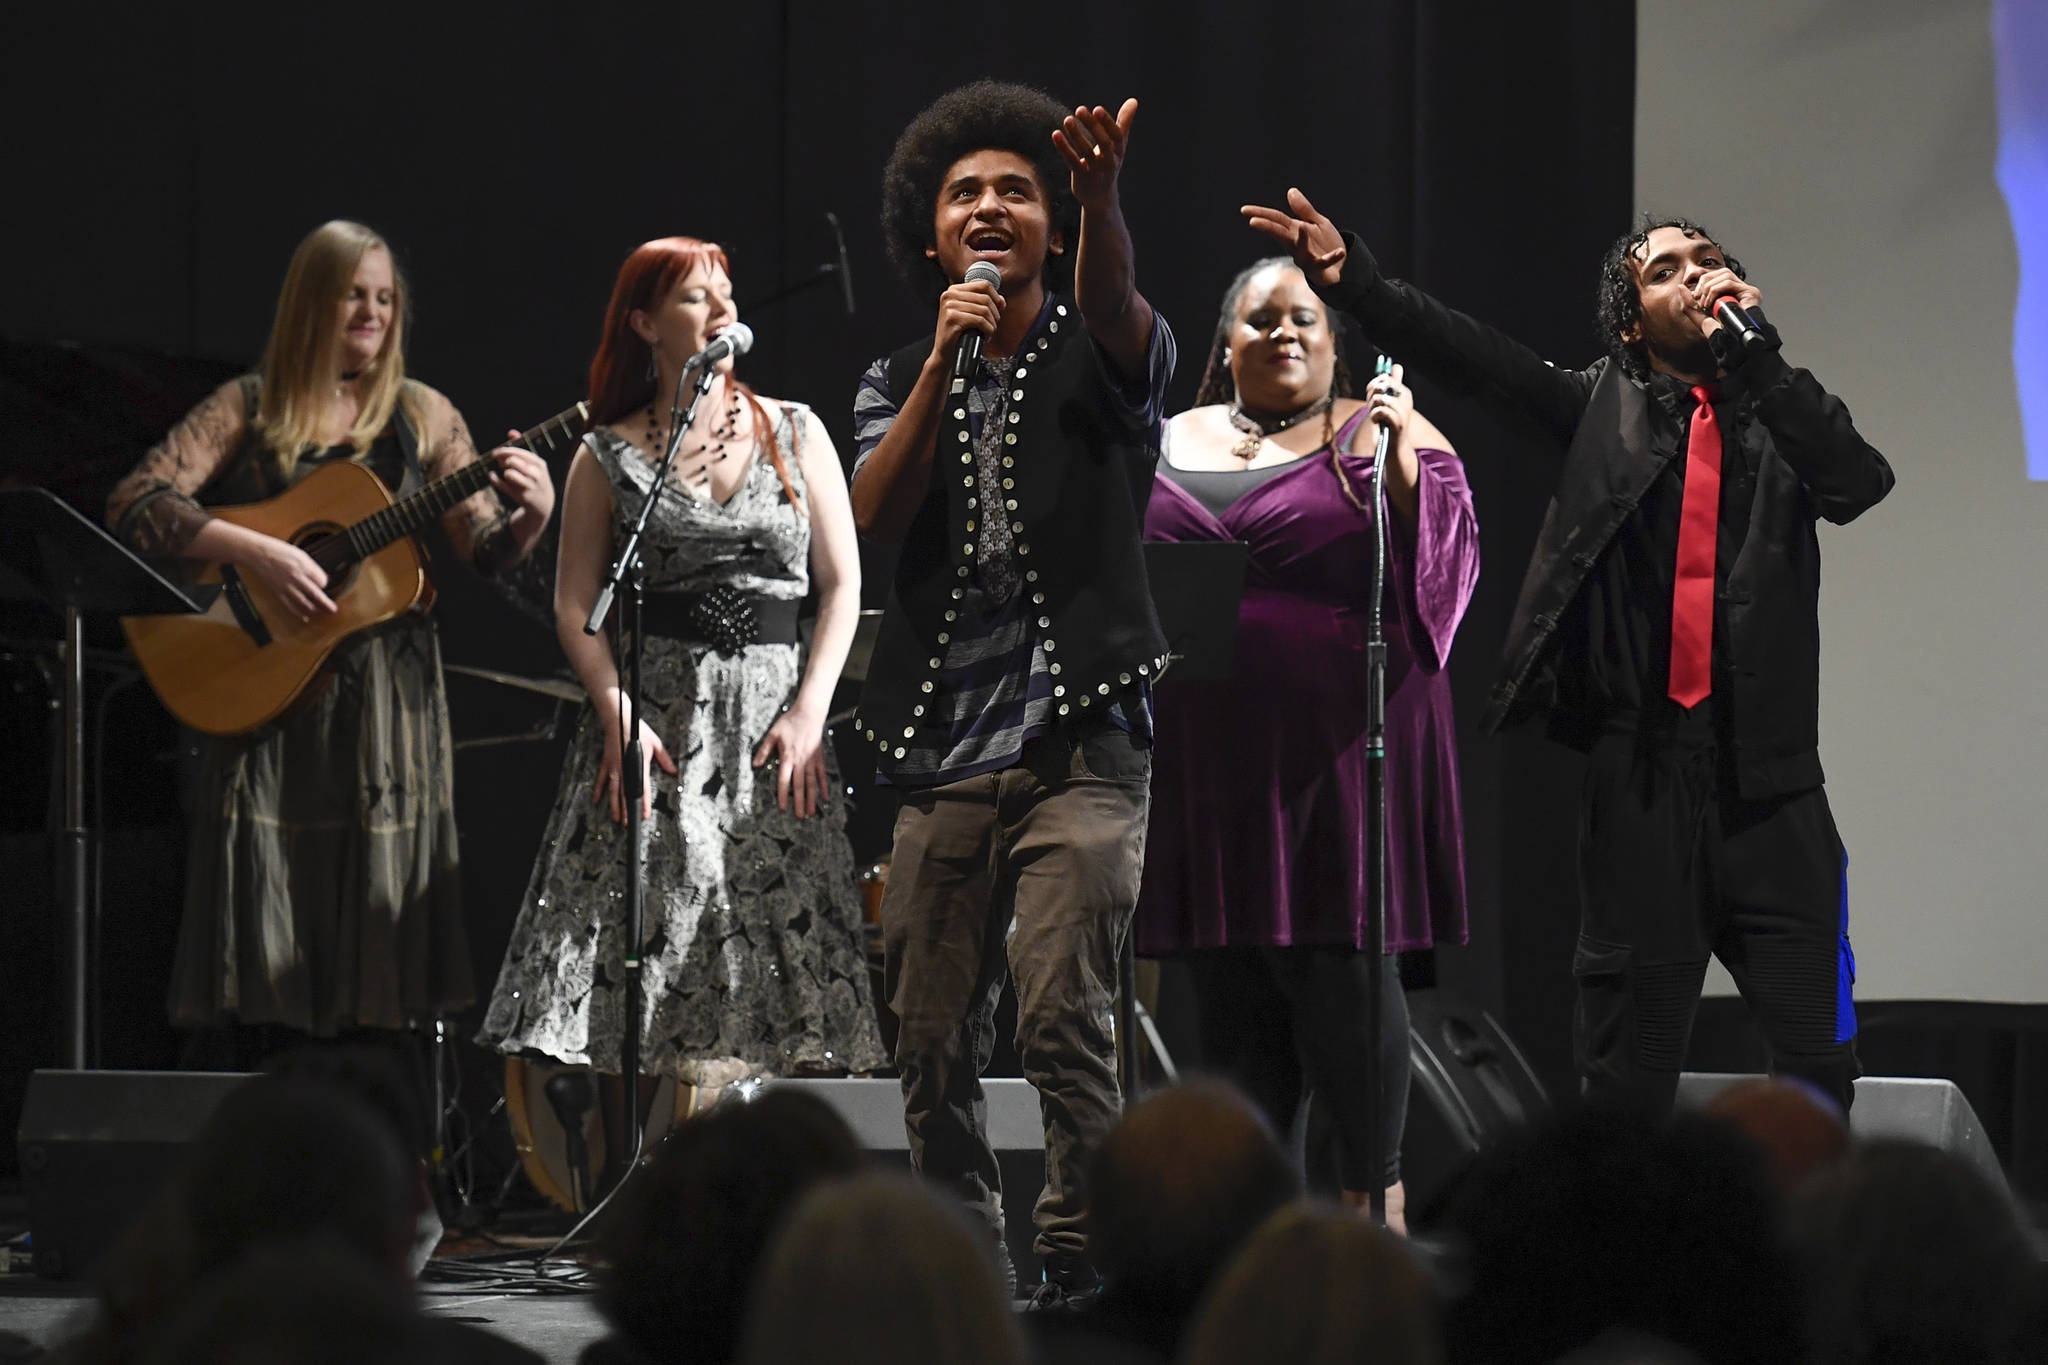 Laura Zahasky, left, Marian Call, Arias Hoyle, Jocelyn Miles and Chris Talley perform at the 2019 Governor’s Arts and Humanities Awards at the Juneau Arts & Culture Center on Thursday, Feb. 7, 2019. (Michael Penn | Juneau Empire)